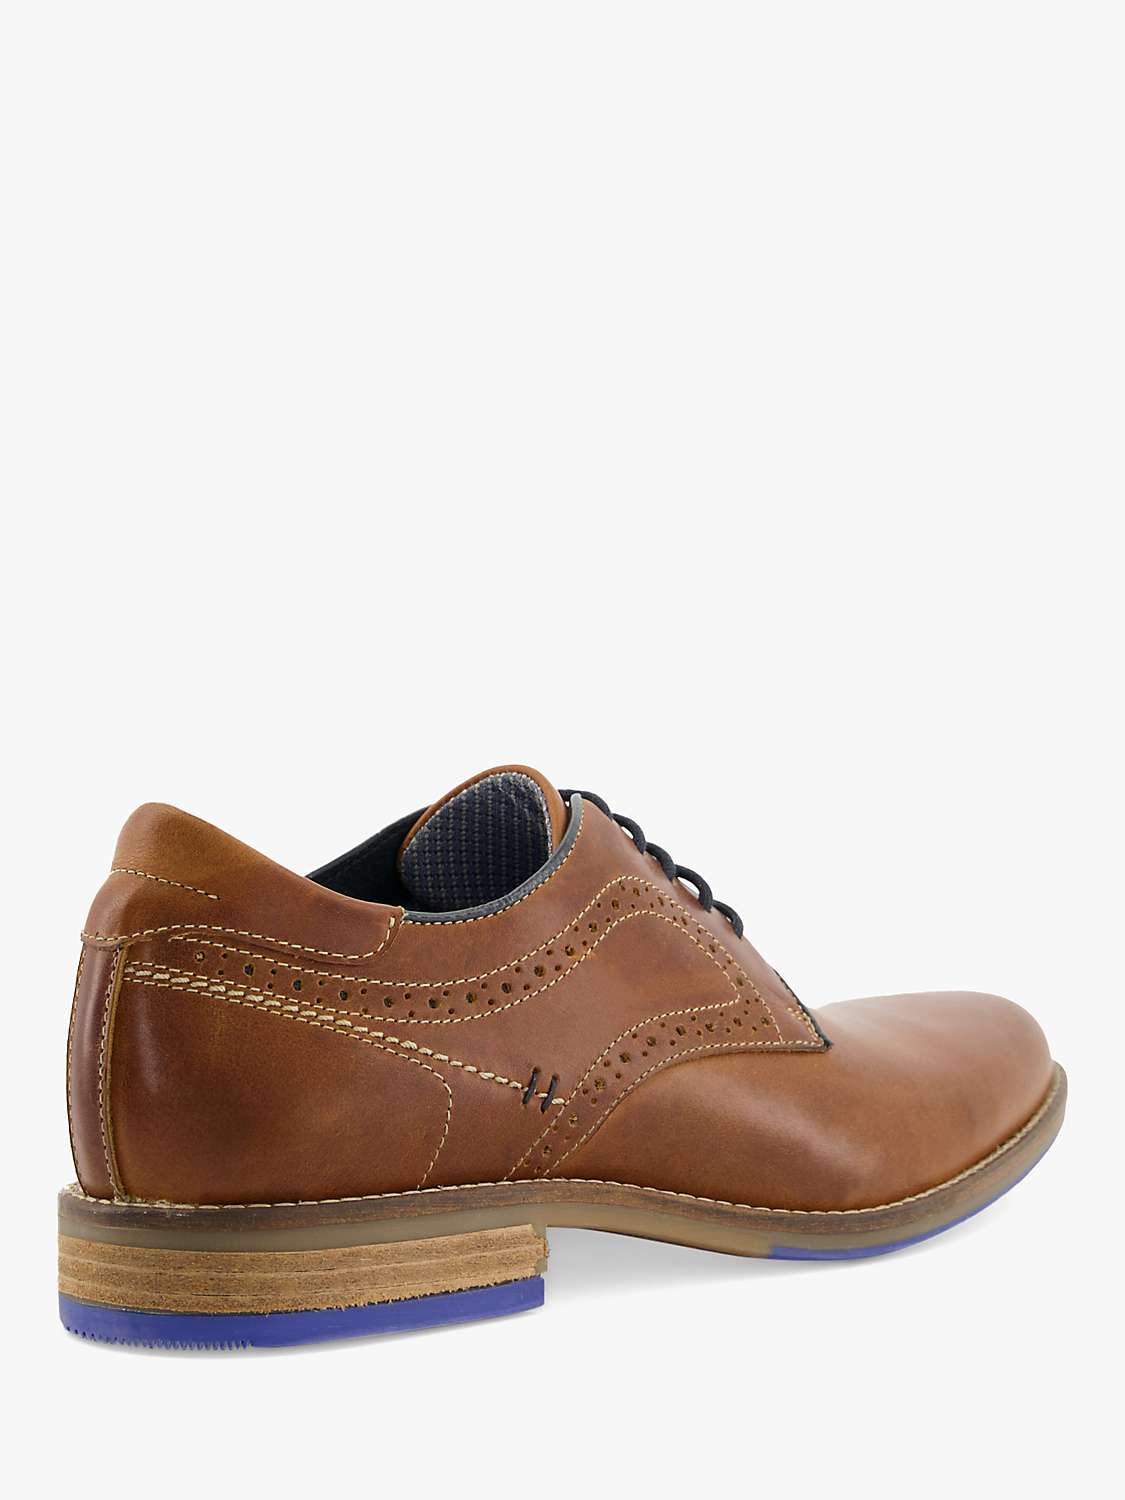 Dune Wide Fit Bintom Leather Stitch Detail Derby Shoes, Tan at John ...